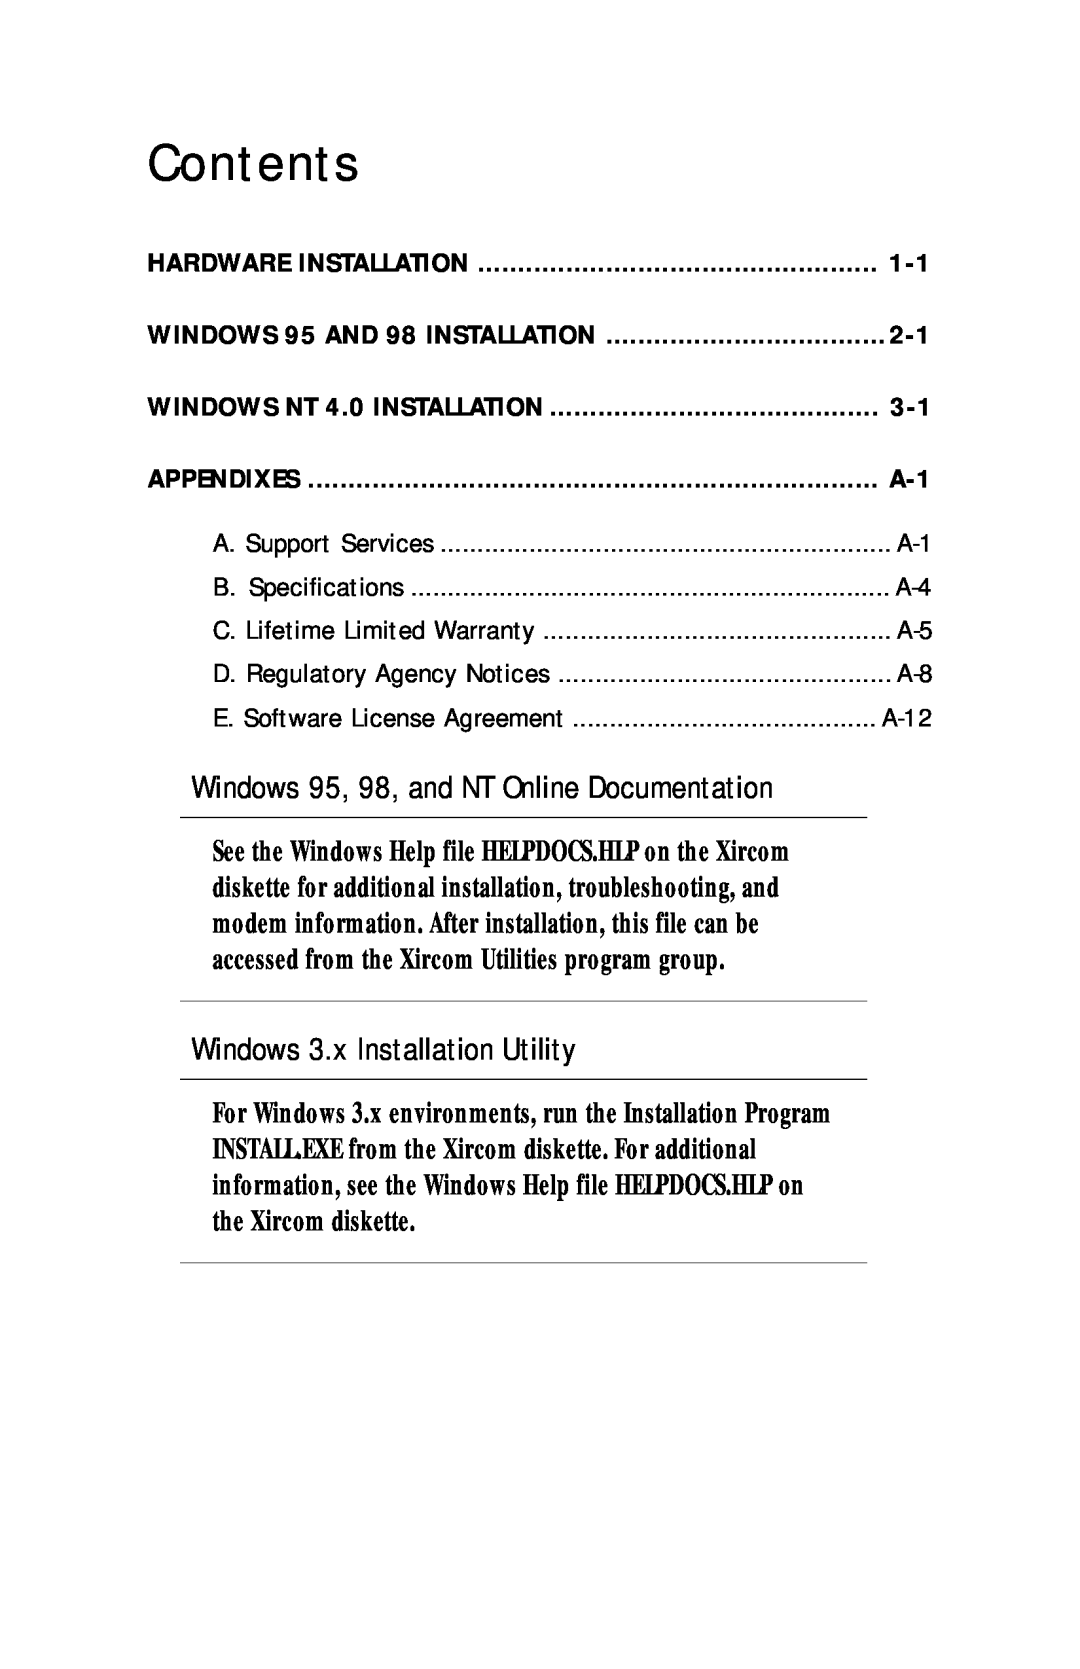 Xircom RM56V1 Windows 95, 98, and NT Online Documentation, Windows 3.x Installation Utility, Table of Contents, A-12 